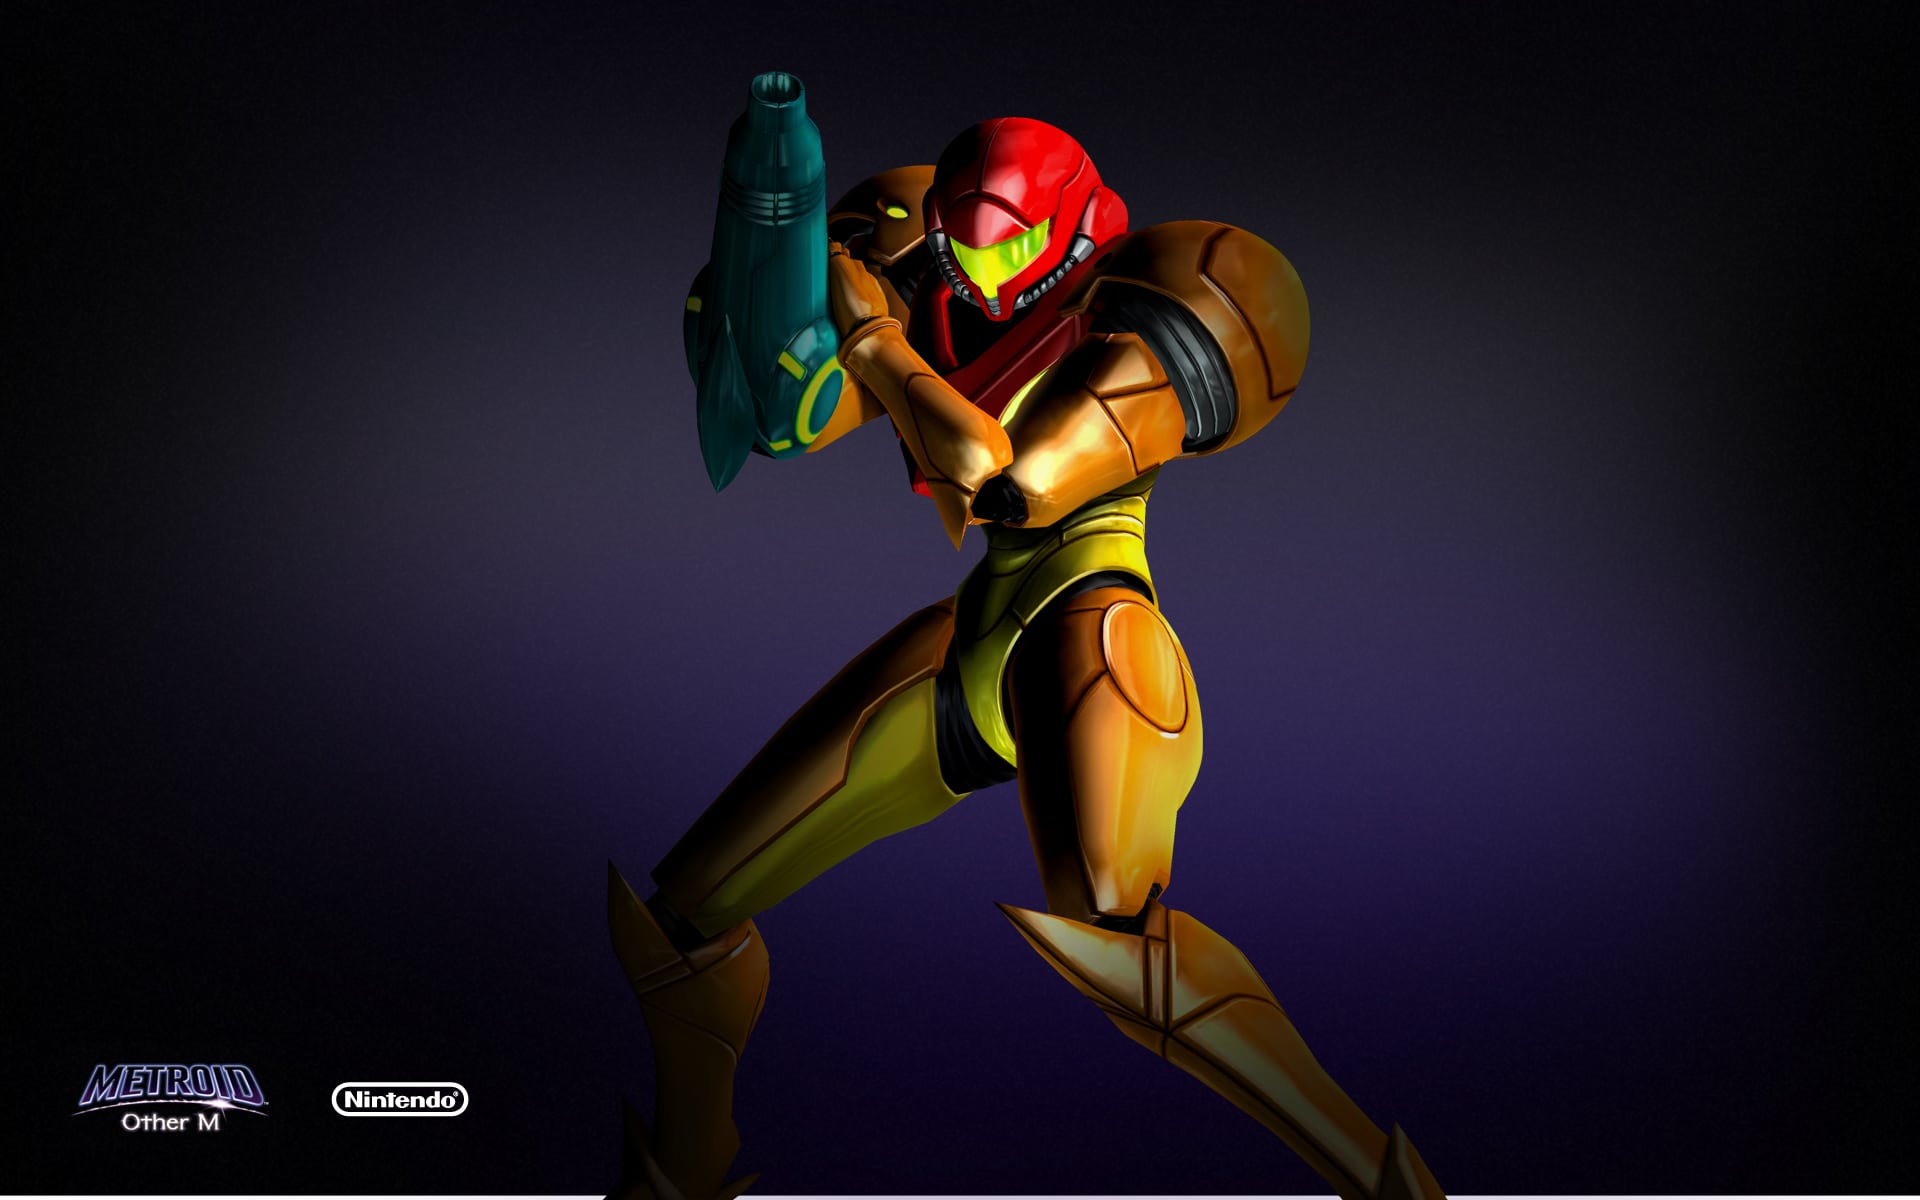 metroid other m switch download free